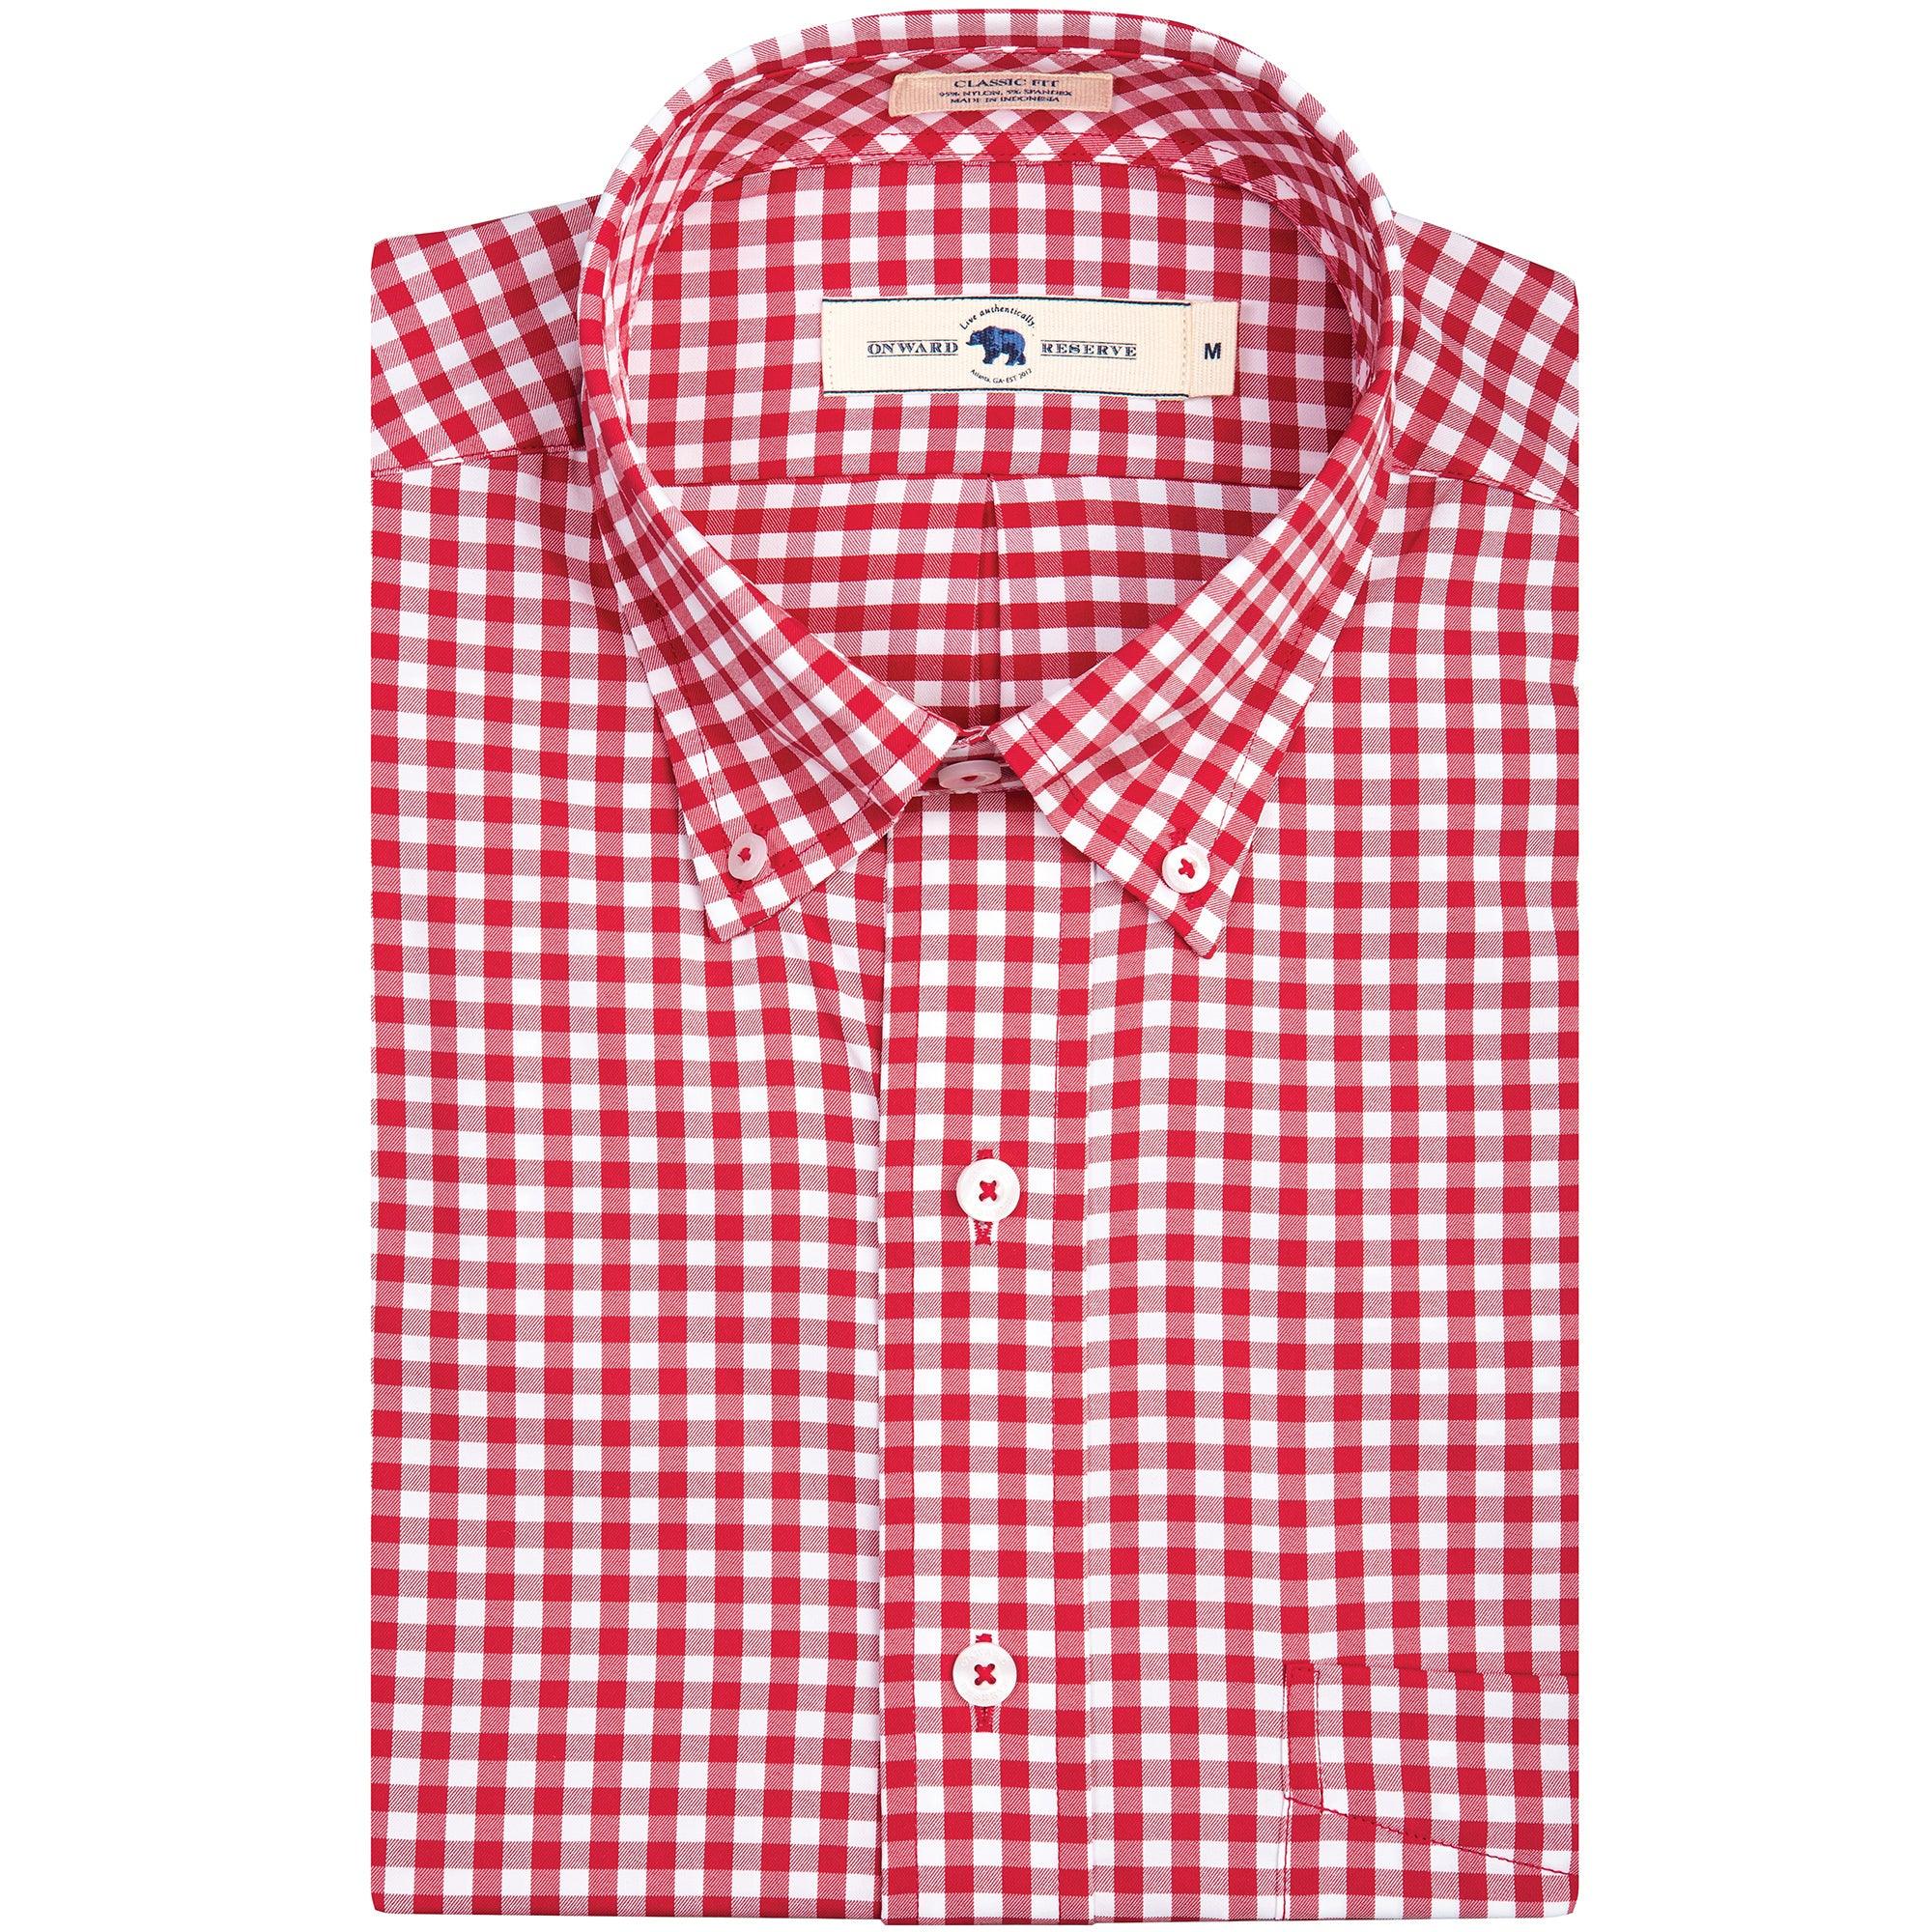 Onward Reserve Button Shirt Men's M Red Check Tailored Fit Non-Iron